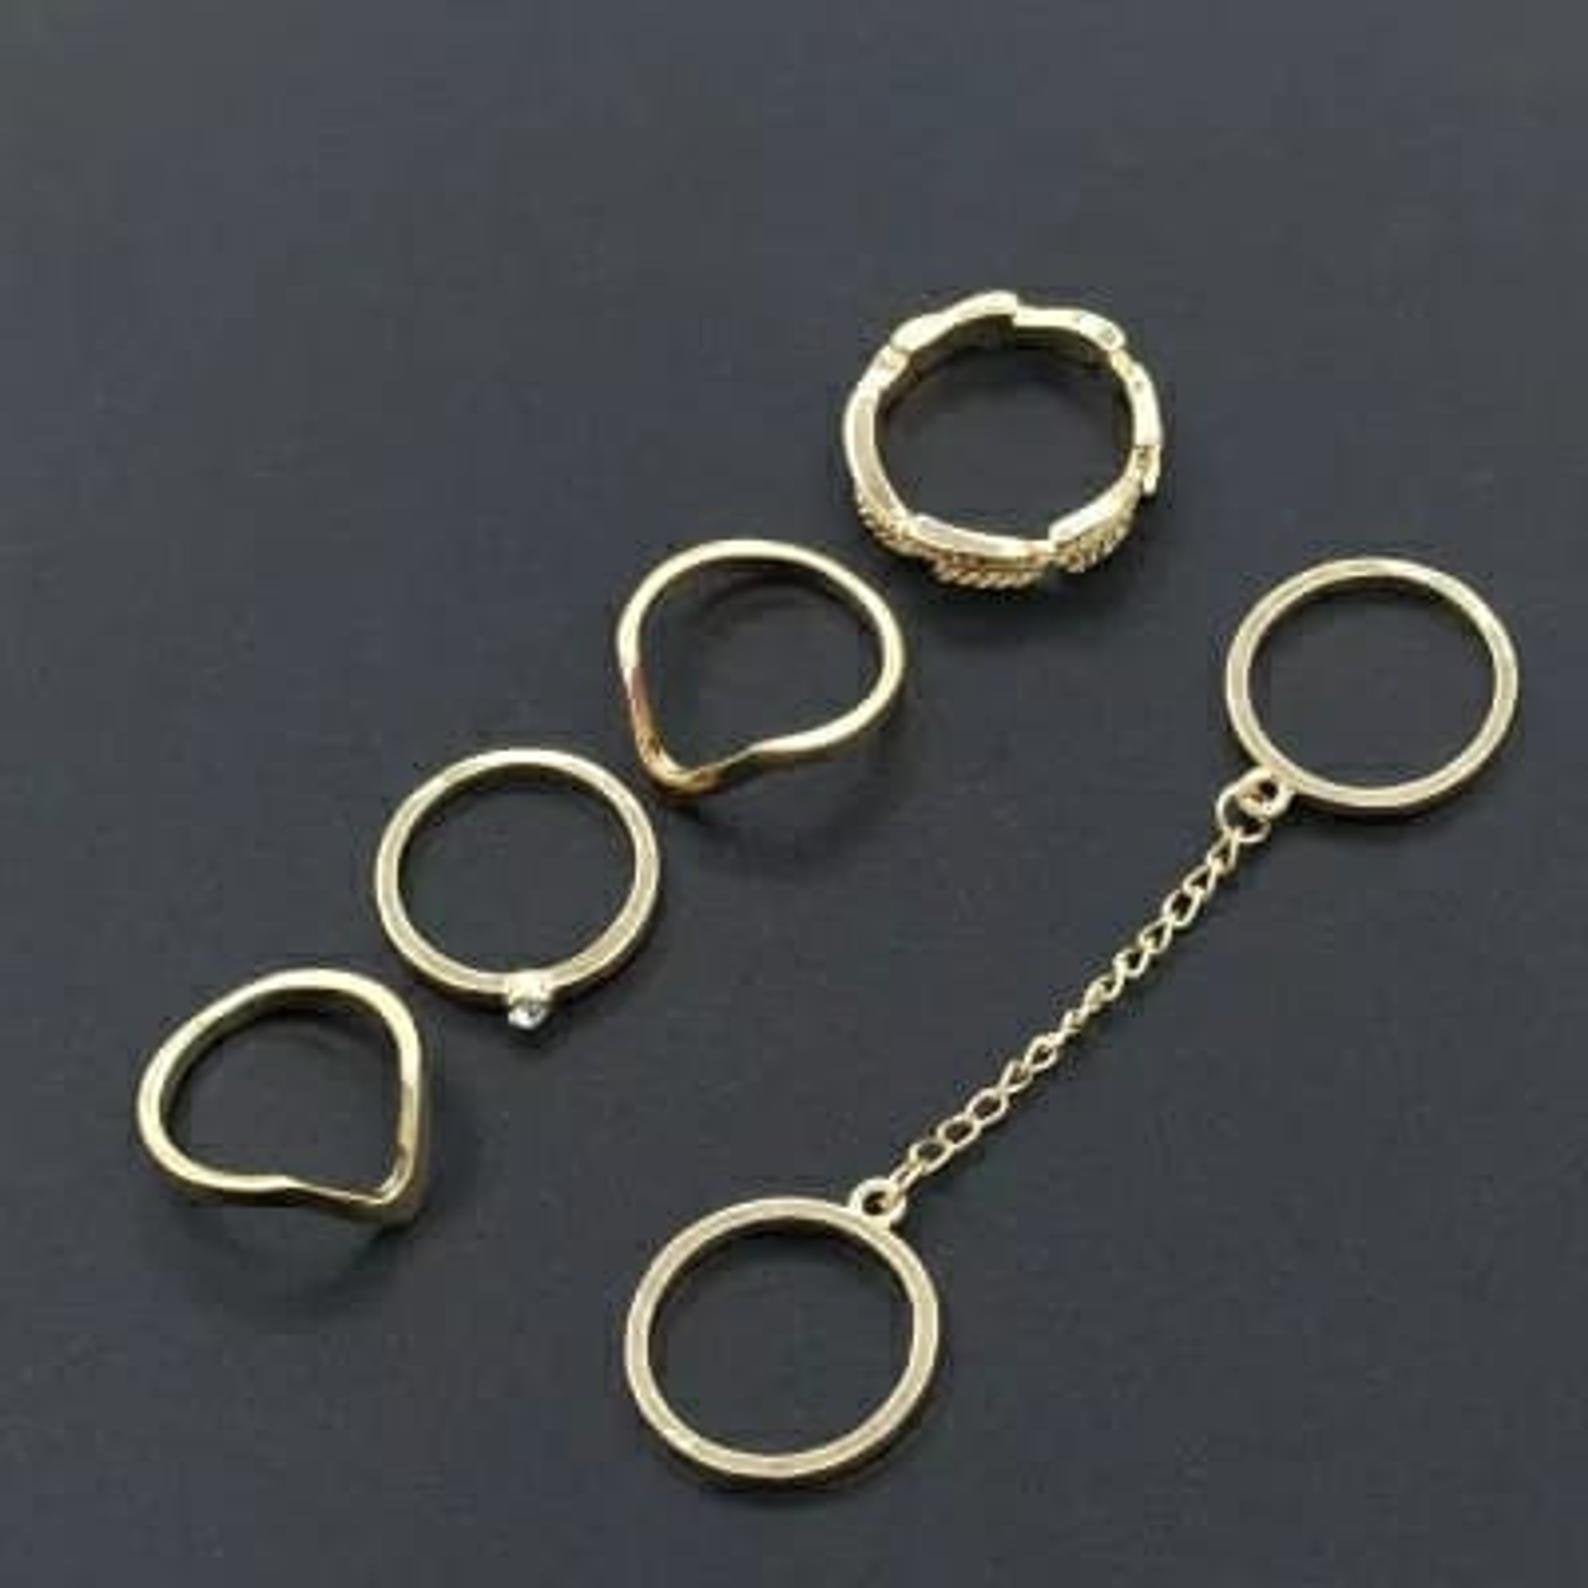 Gold Chain Knuckle ring set